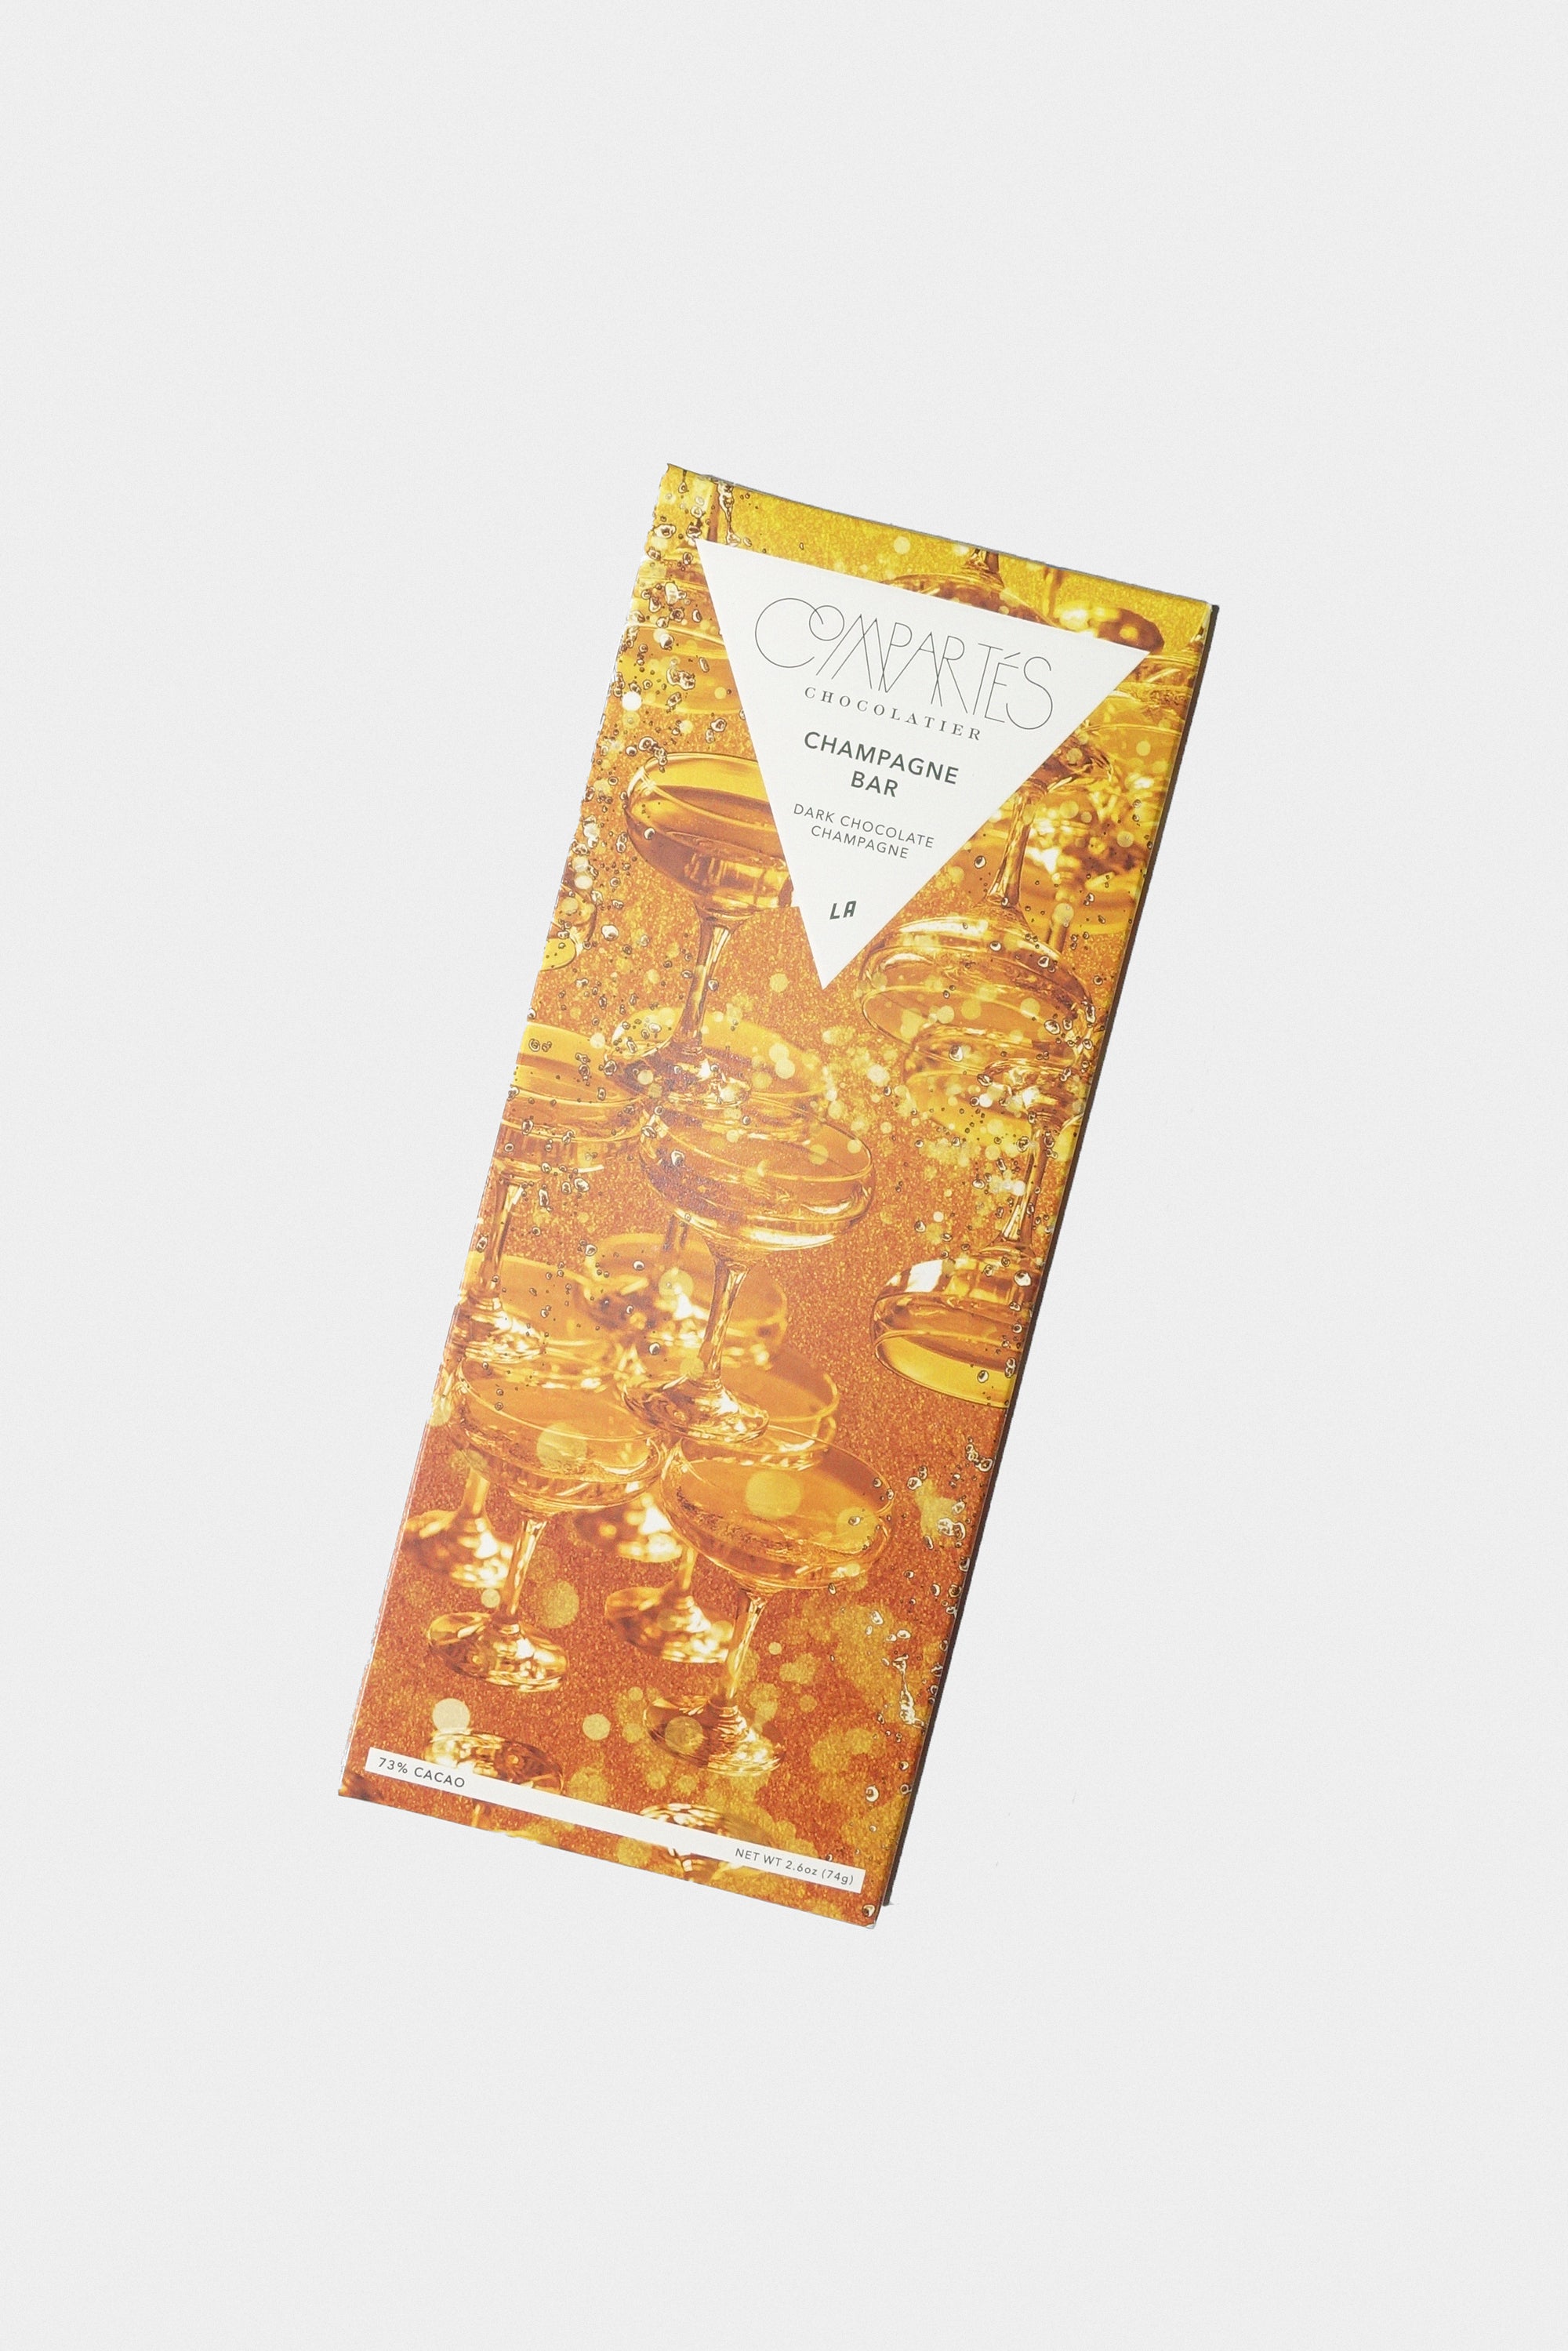 Champagne Dark Chocolate Bar by COmpartes